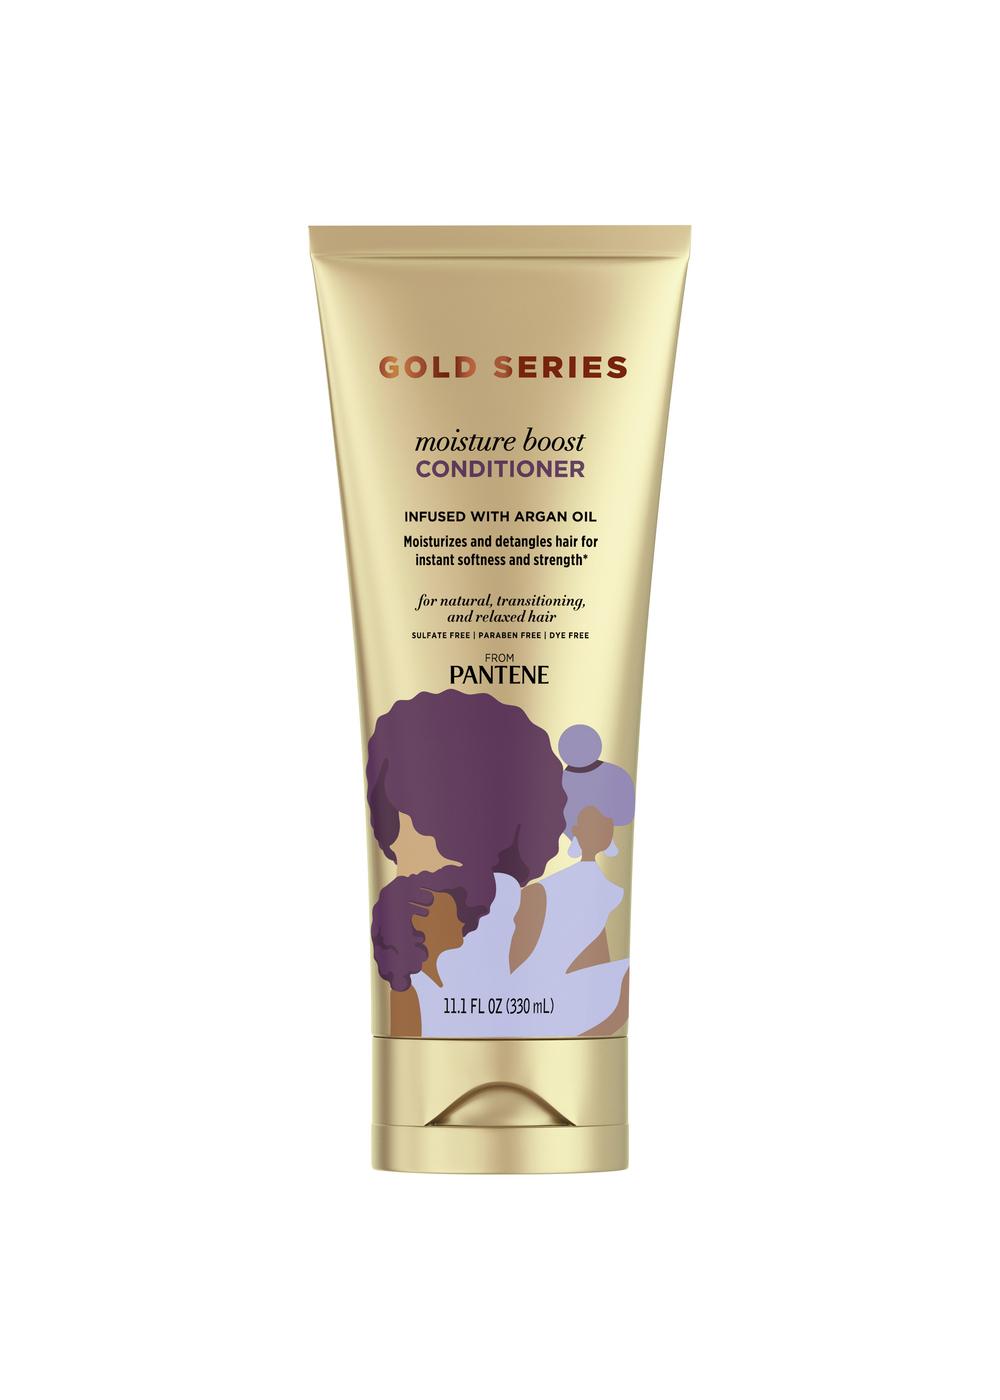 Pantene Gold Series Moisture Boost Conditioner; image 1 of 3